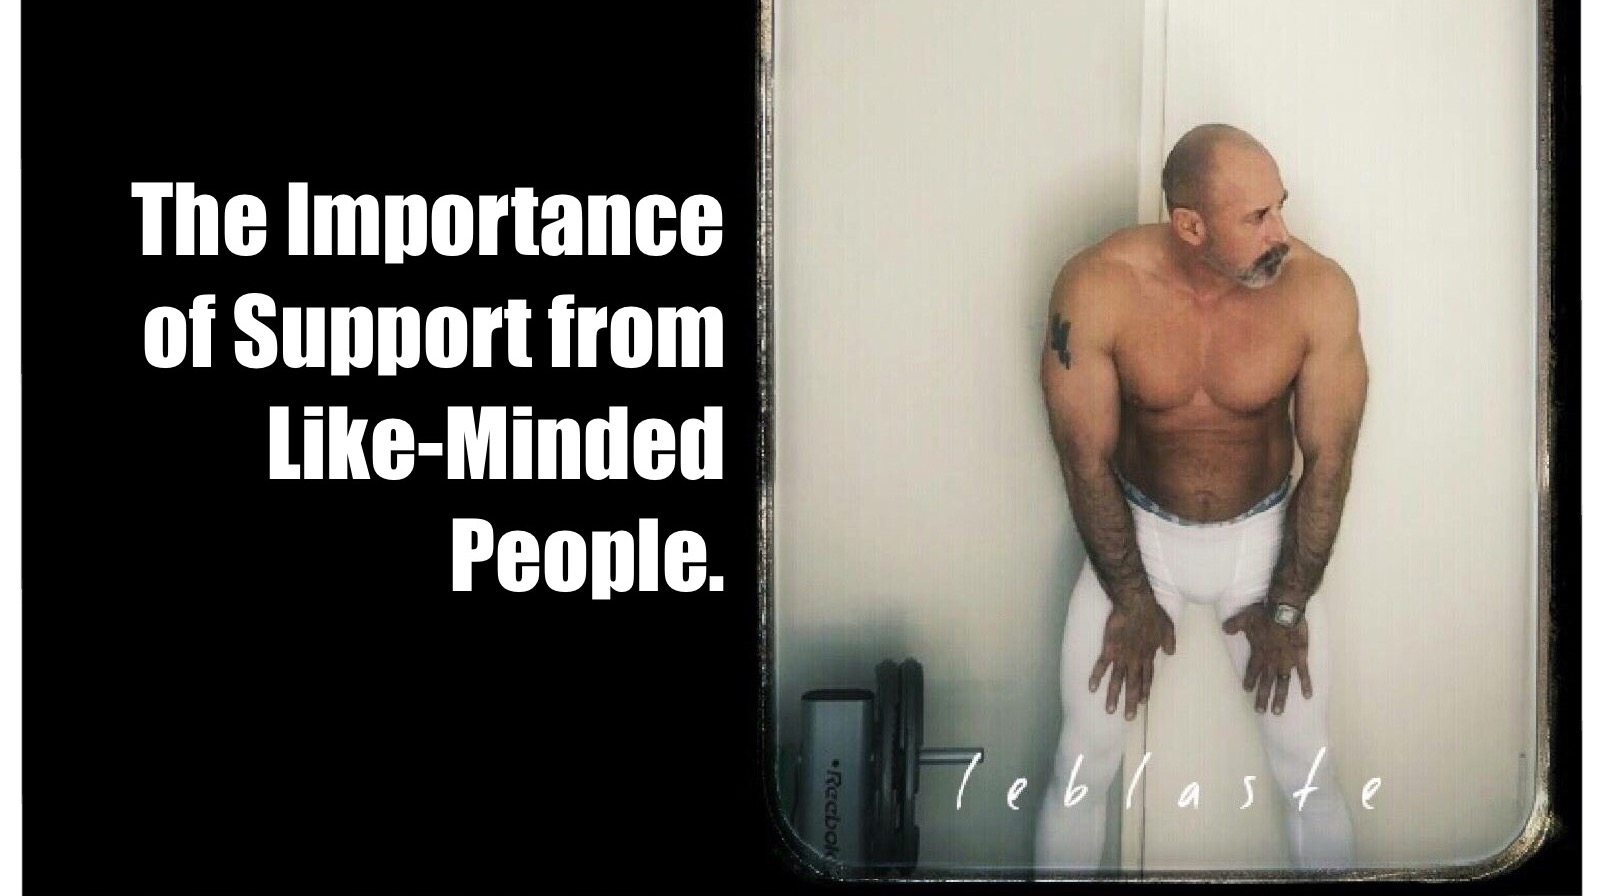 The Importance of Support from Like-Minded People.